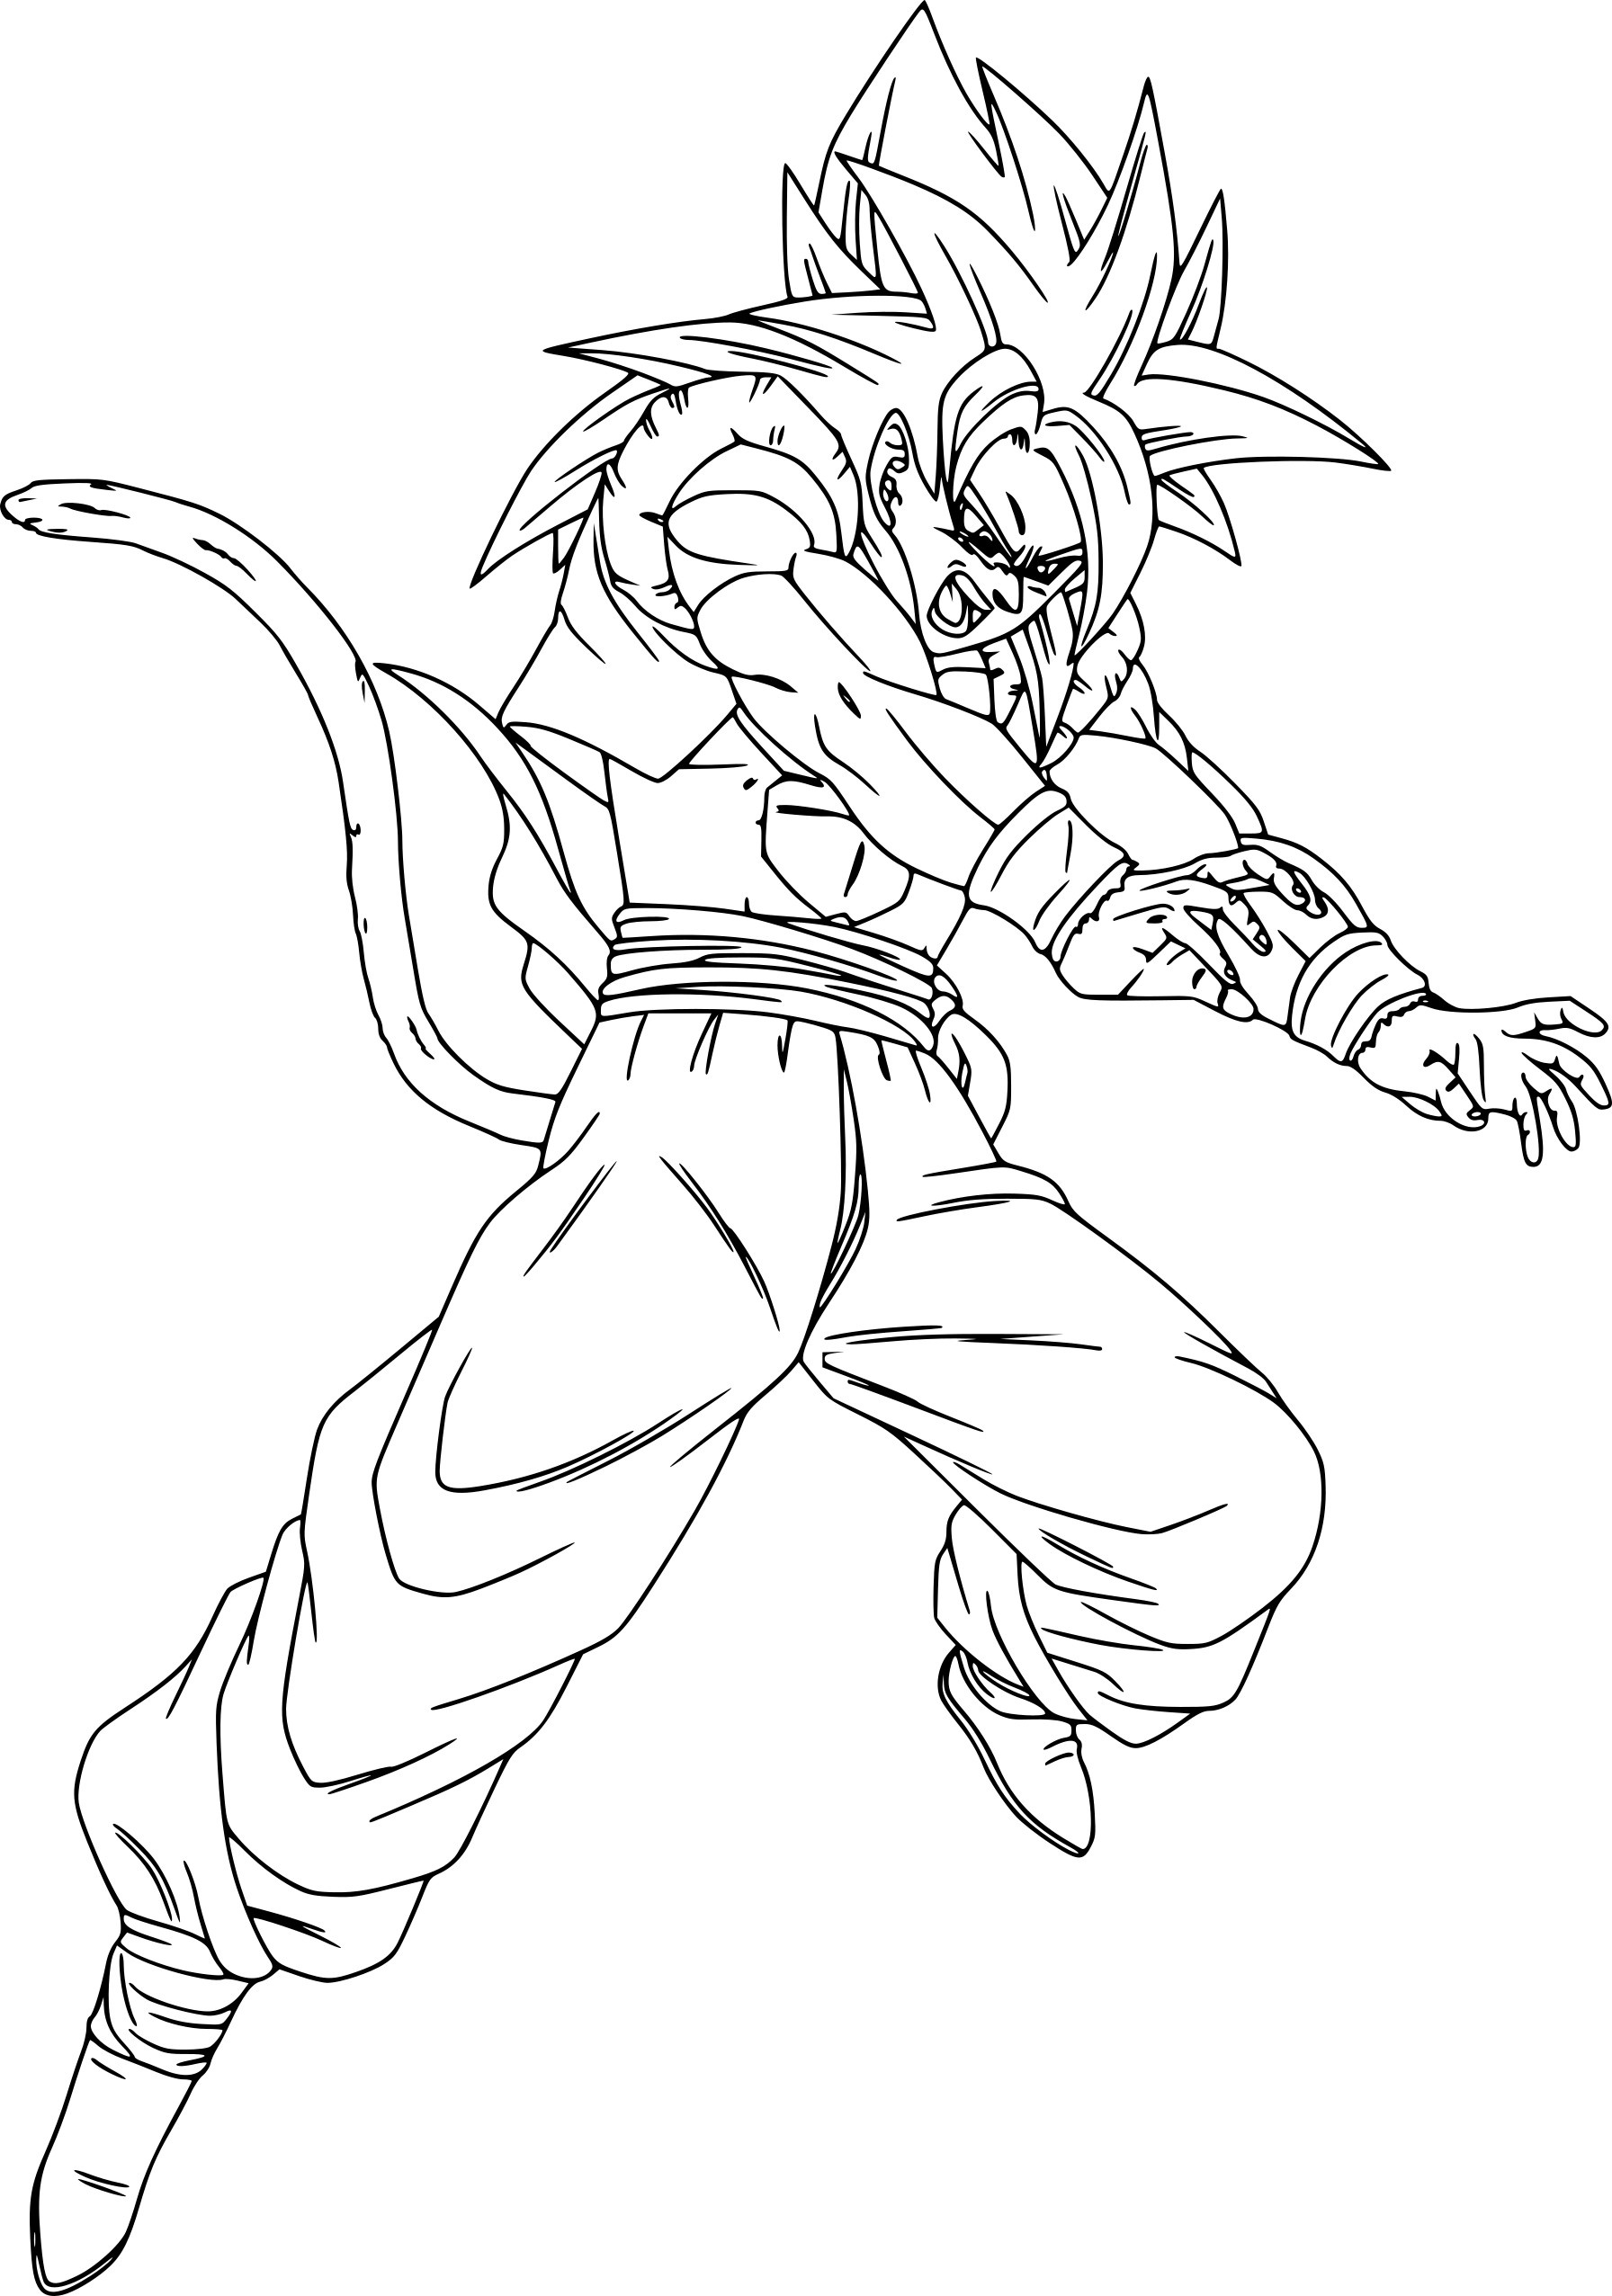 Coloriages Dragon Ball Z Inspirant Galerie Coloriage Dragon Ball Z